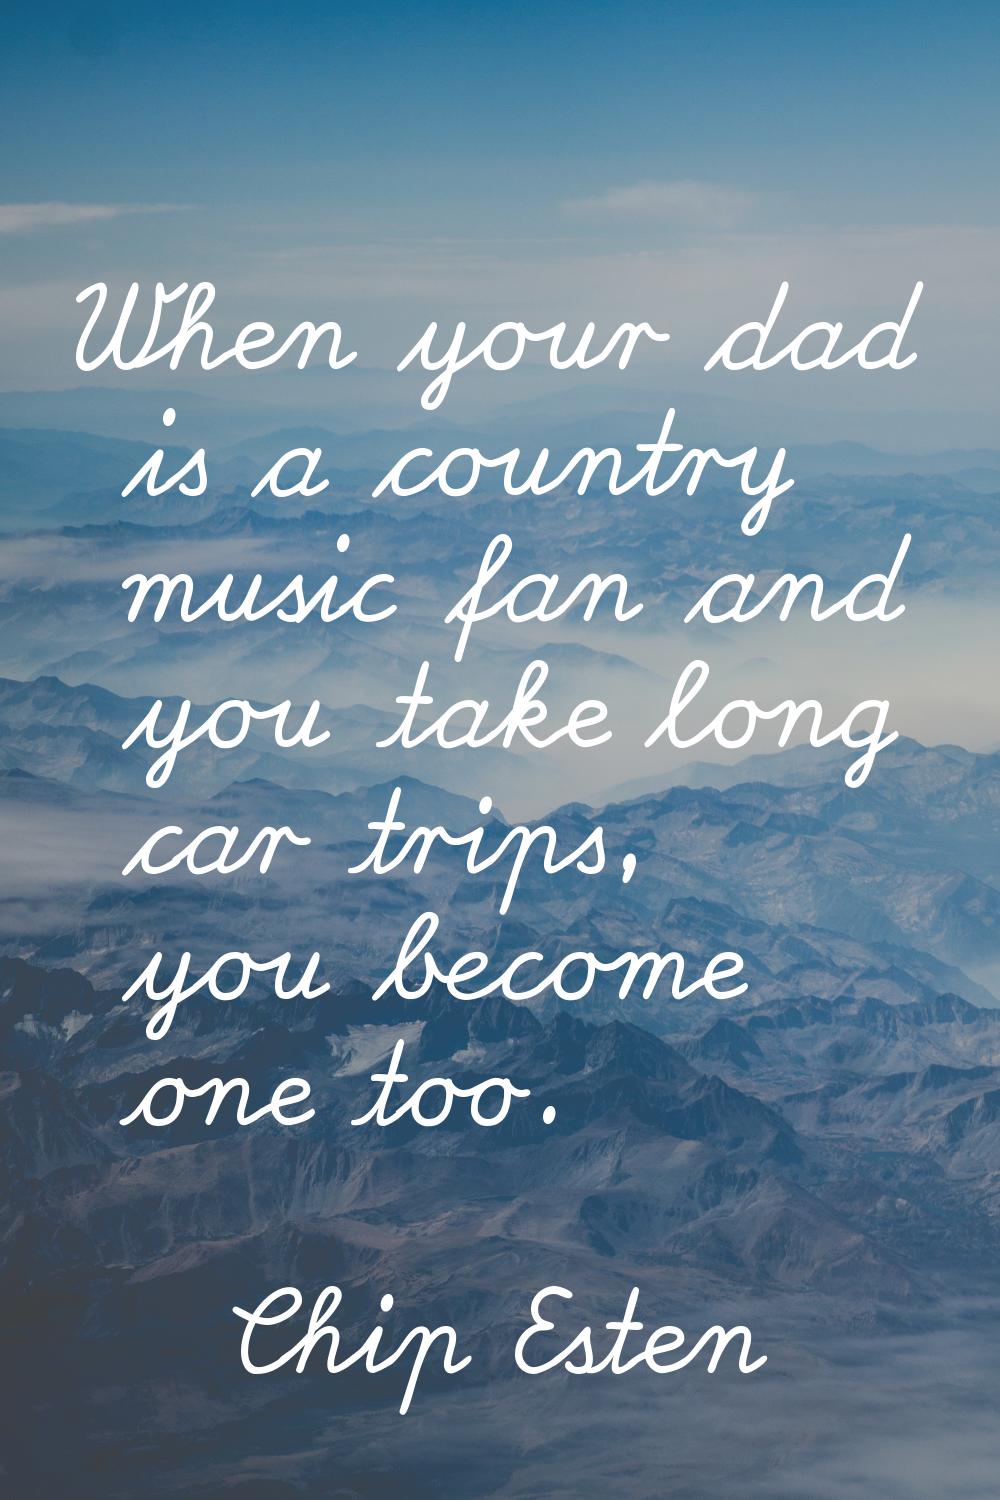 When your dad is a country music fan and you take long car trips, you become one too.